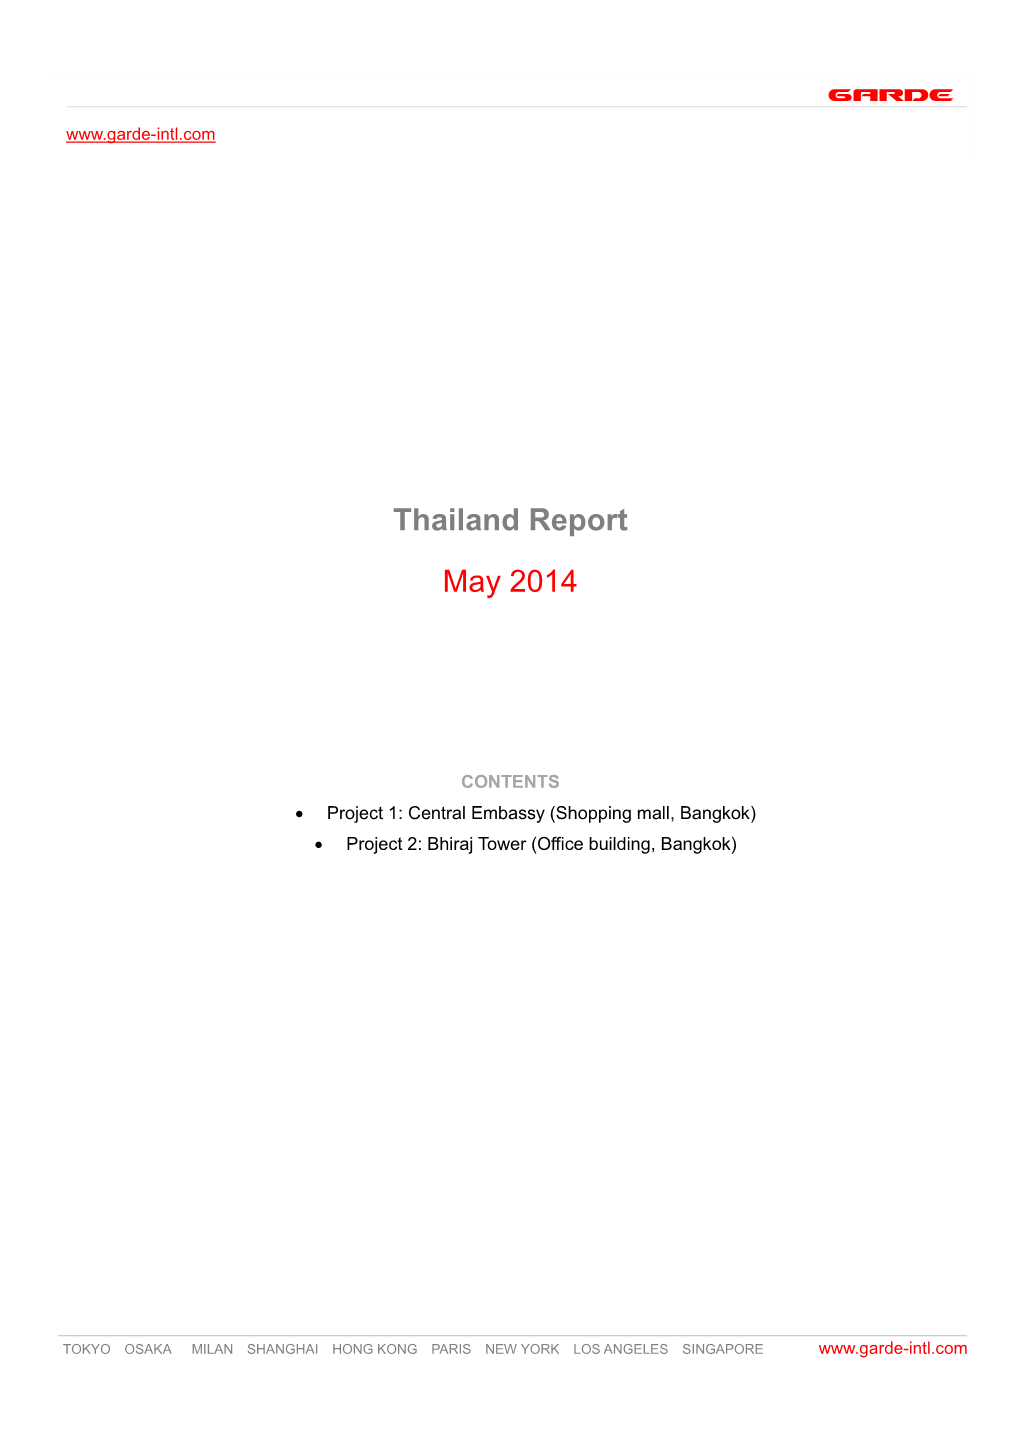 Thailand Report May 2014